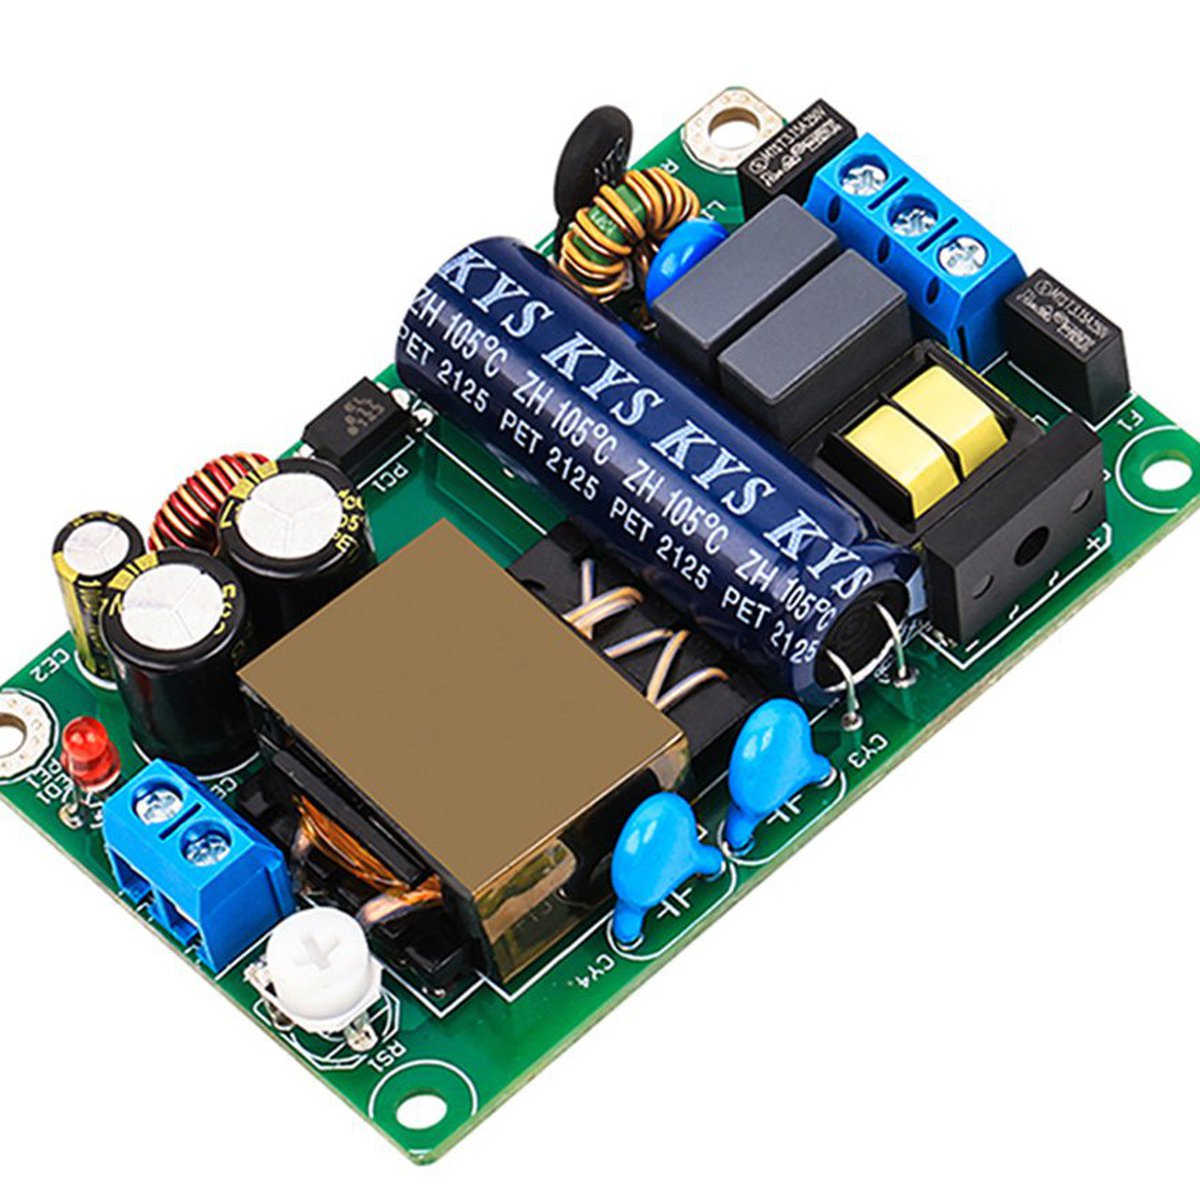 24V 2A AC-DC Power Supply Module from ICStation on Tindie